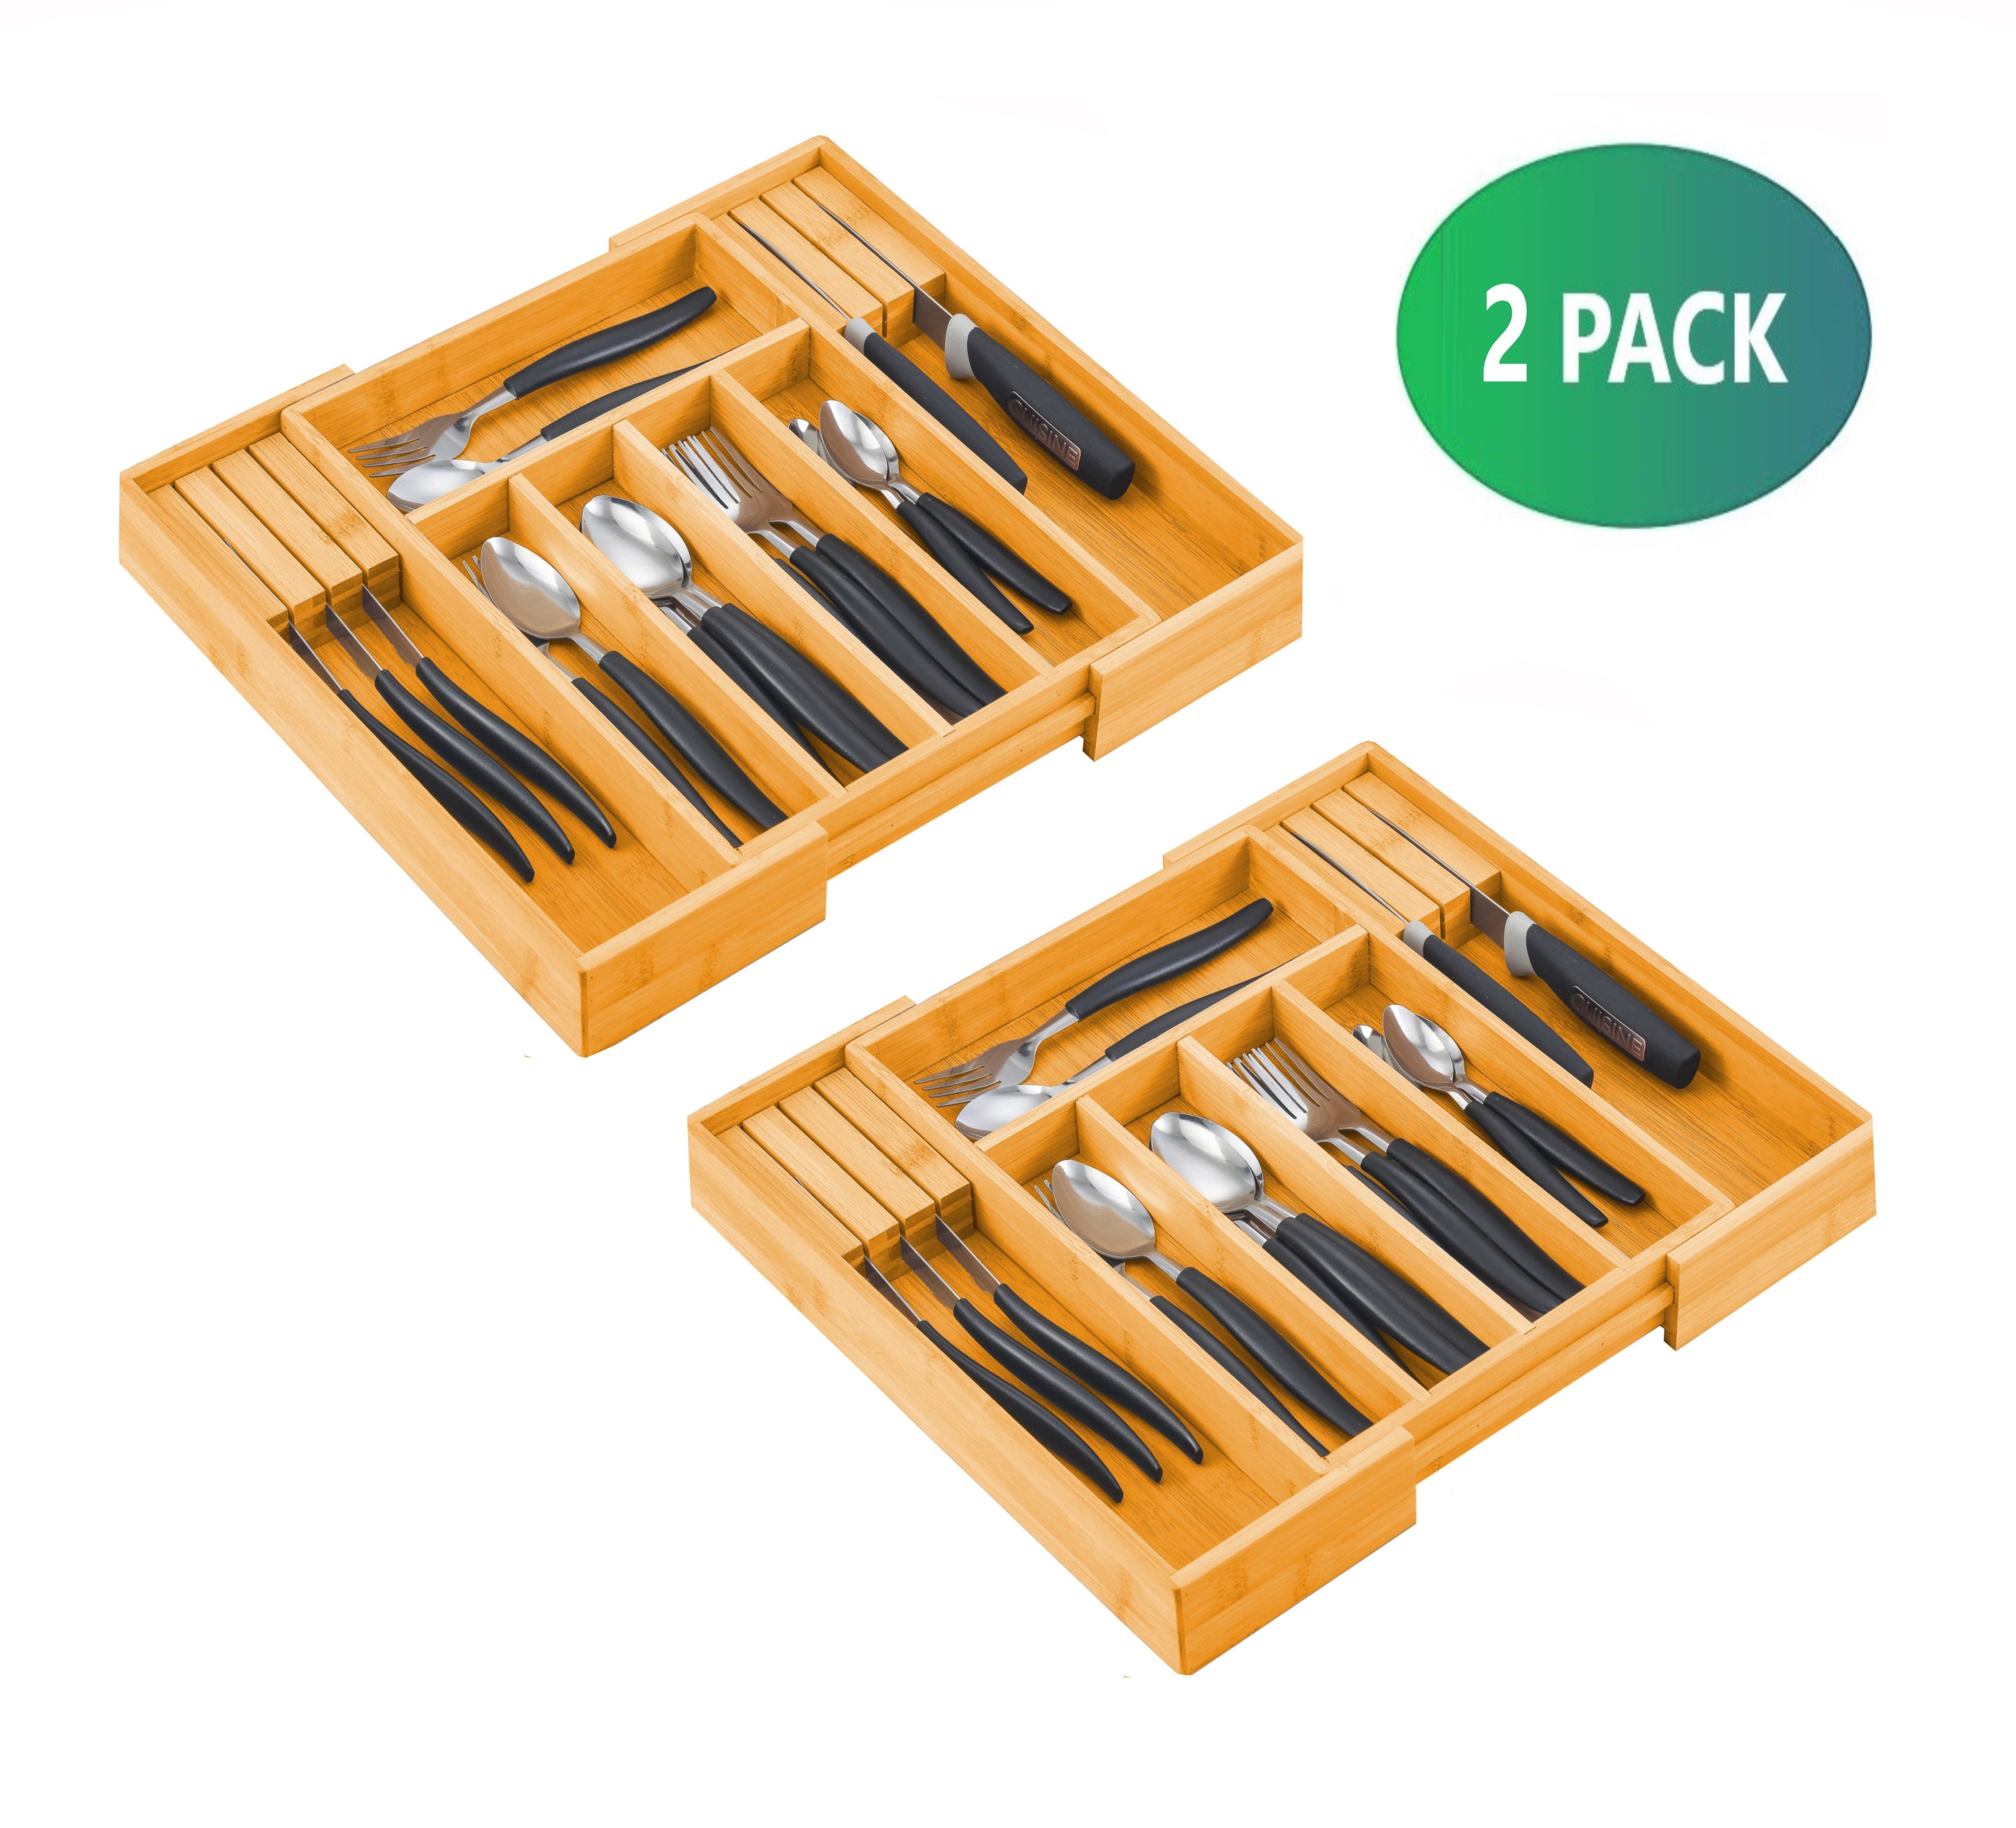 2 Pack Large Capacity Bamboo Expandable Drawer Organizer with Knife Block Holder for Home Kitchen Utensils - 0